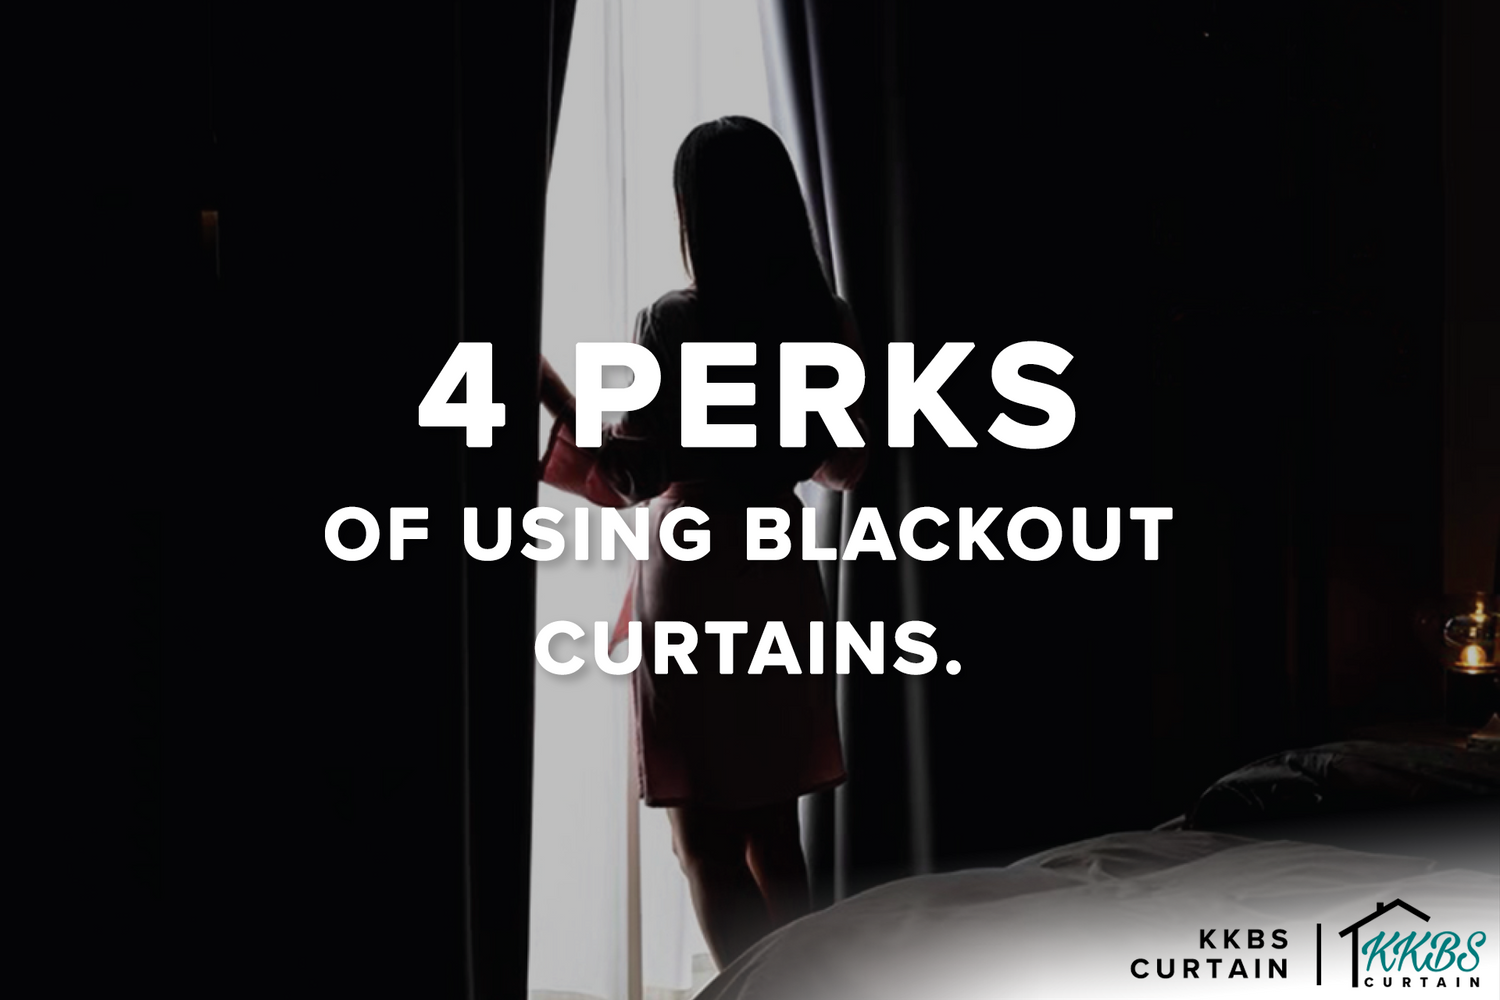 4 Perks of Using Blackout Curtains